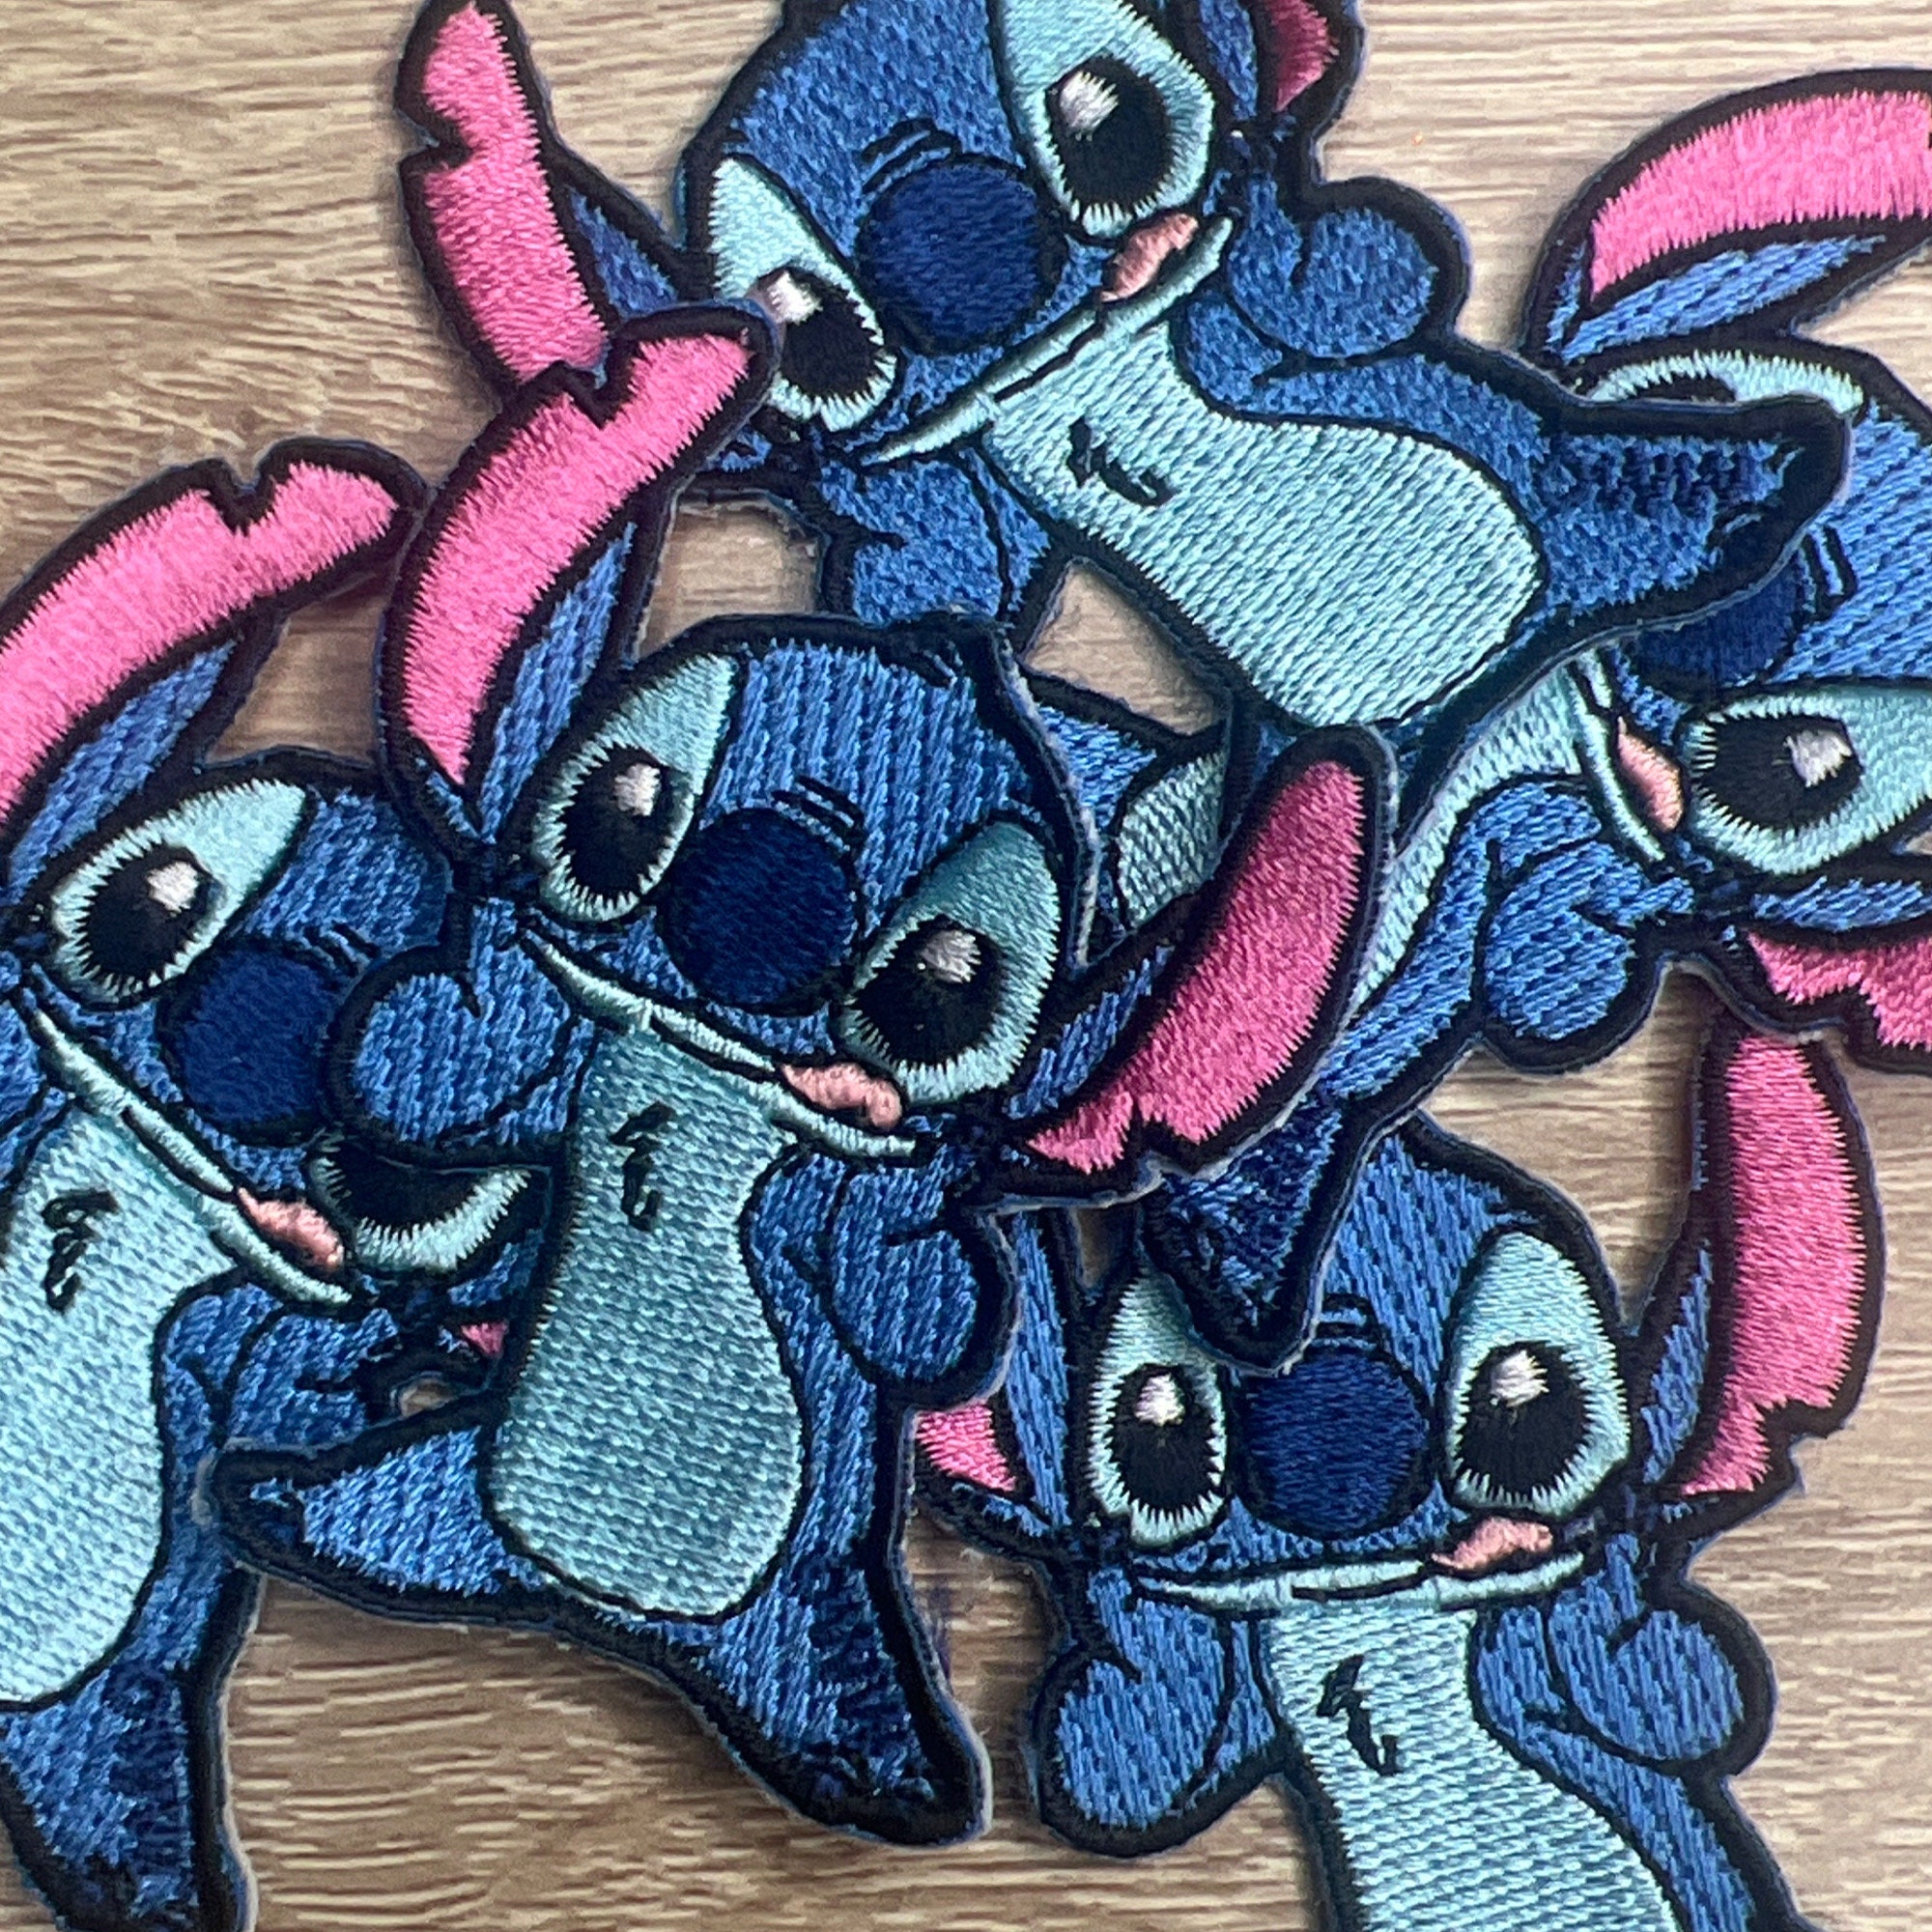 Stitch Face - Lilo & Stitch Iron On Patch Sew on transfer Embroidered badge  New